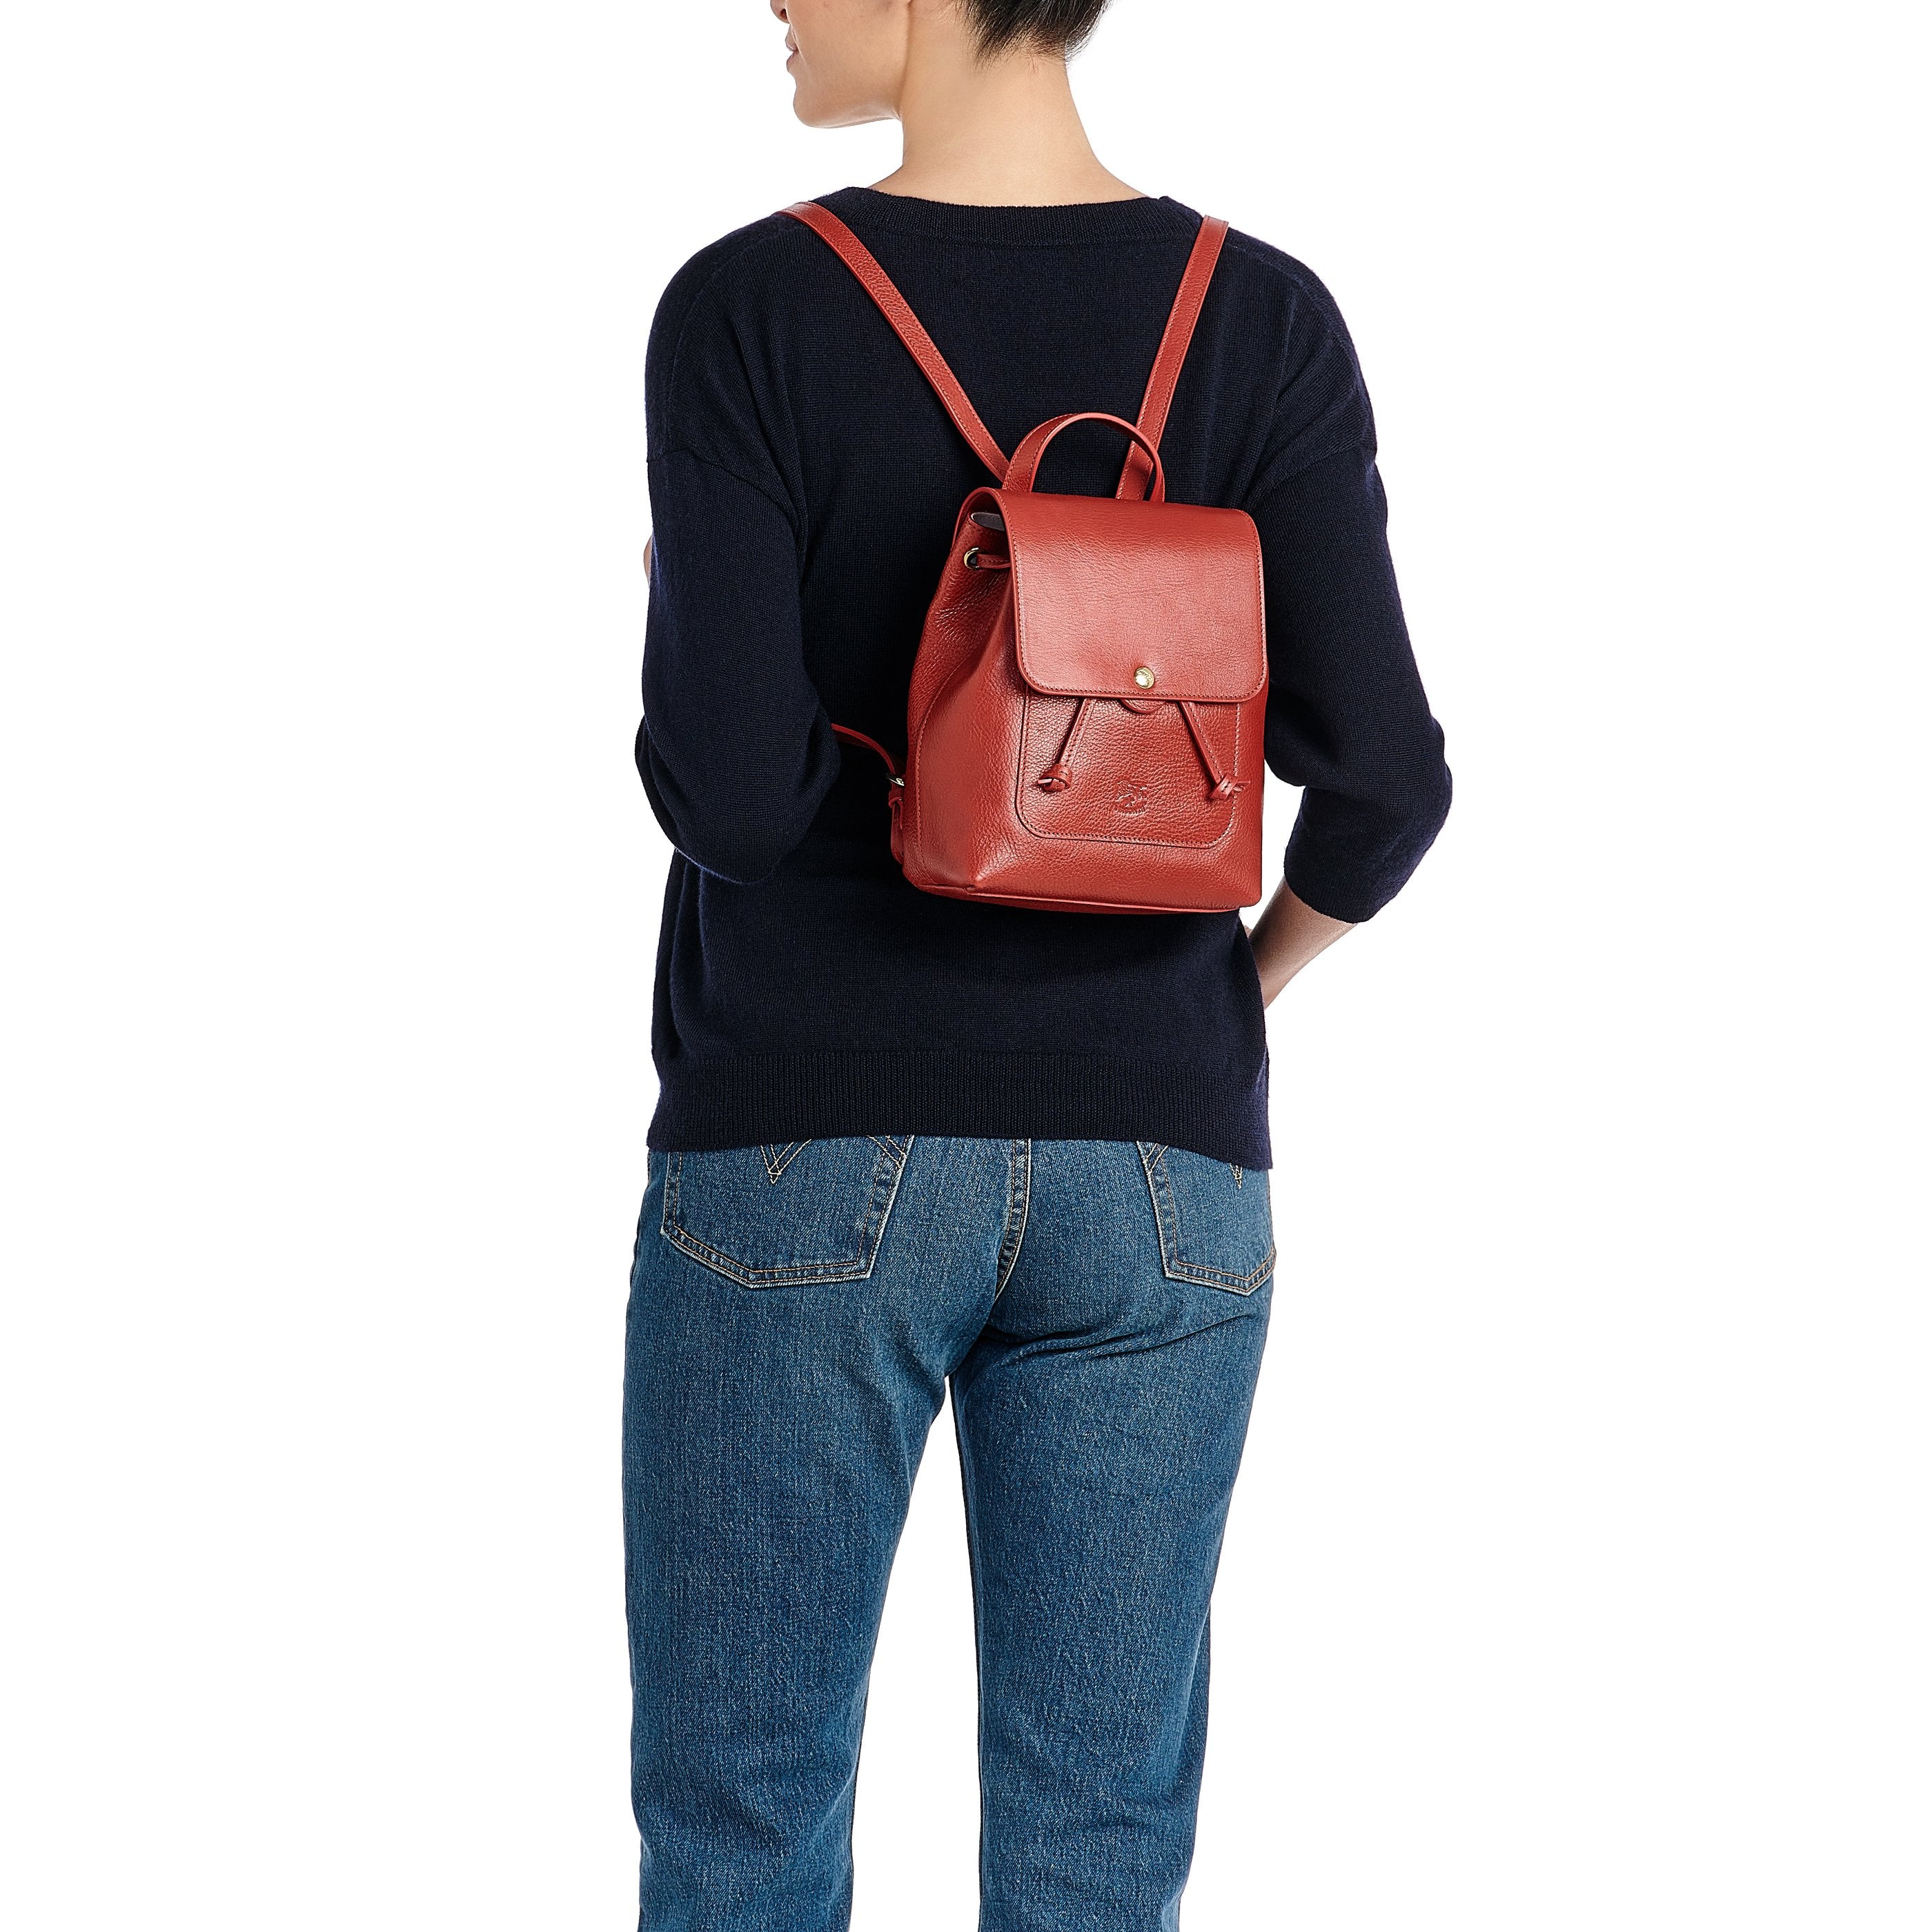 Mezzomonte | Women's backpack in leather color red – Il Bisonte